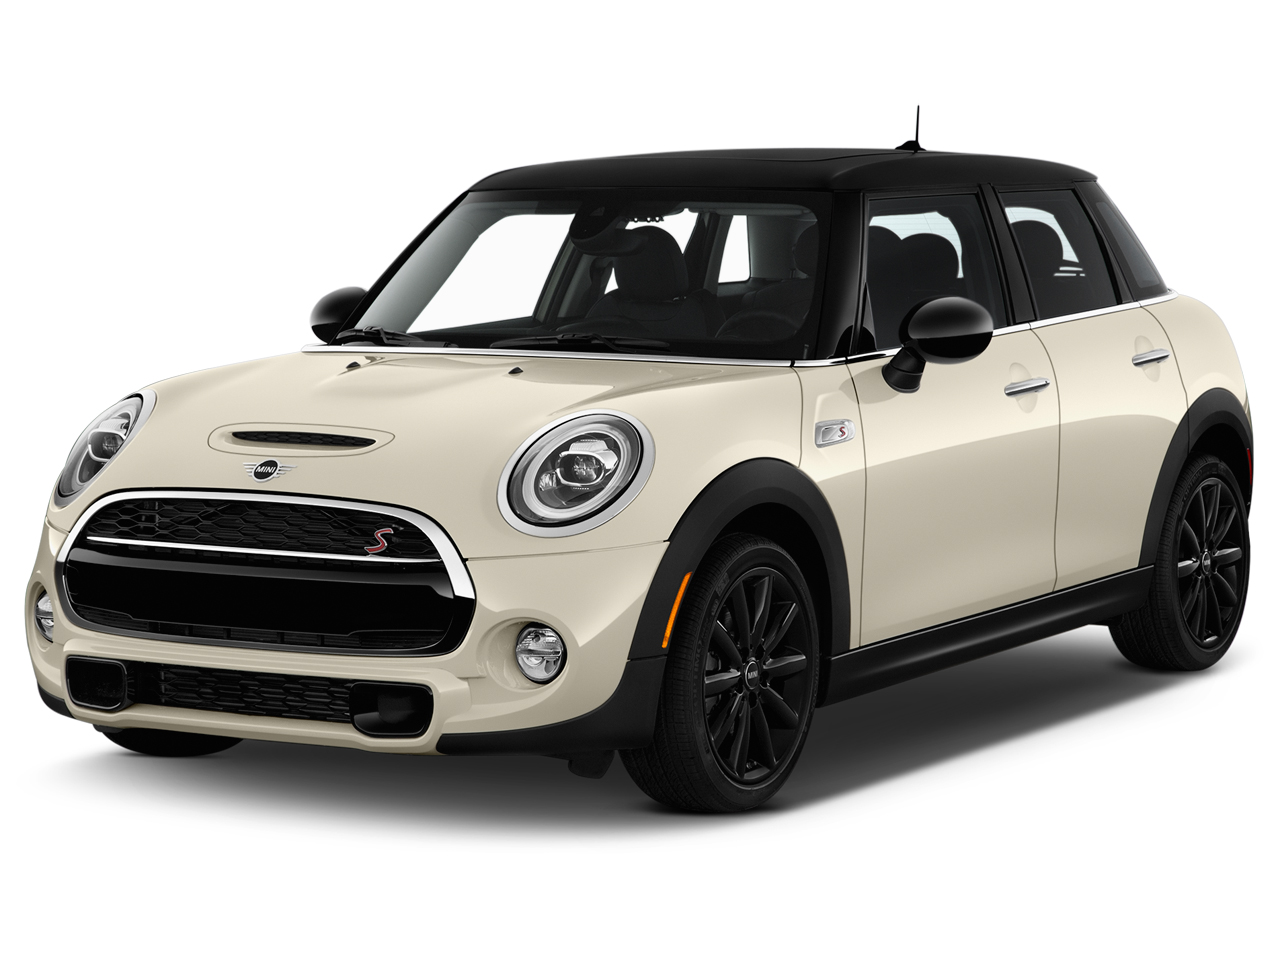 2019 MINI Hardtop 2 Door Review, Ratings, Specs, Prices, and Photos ...